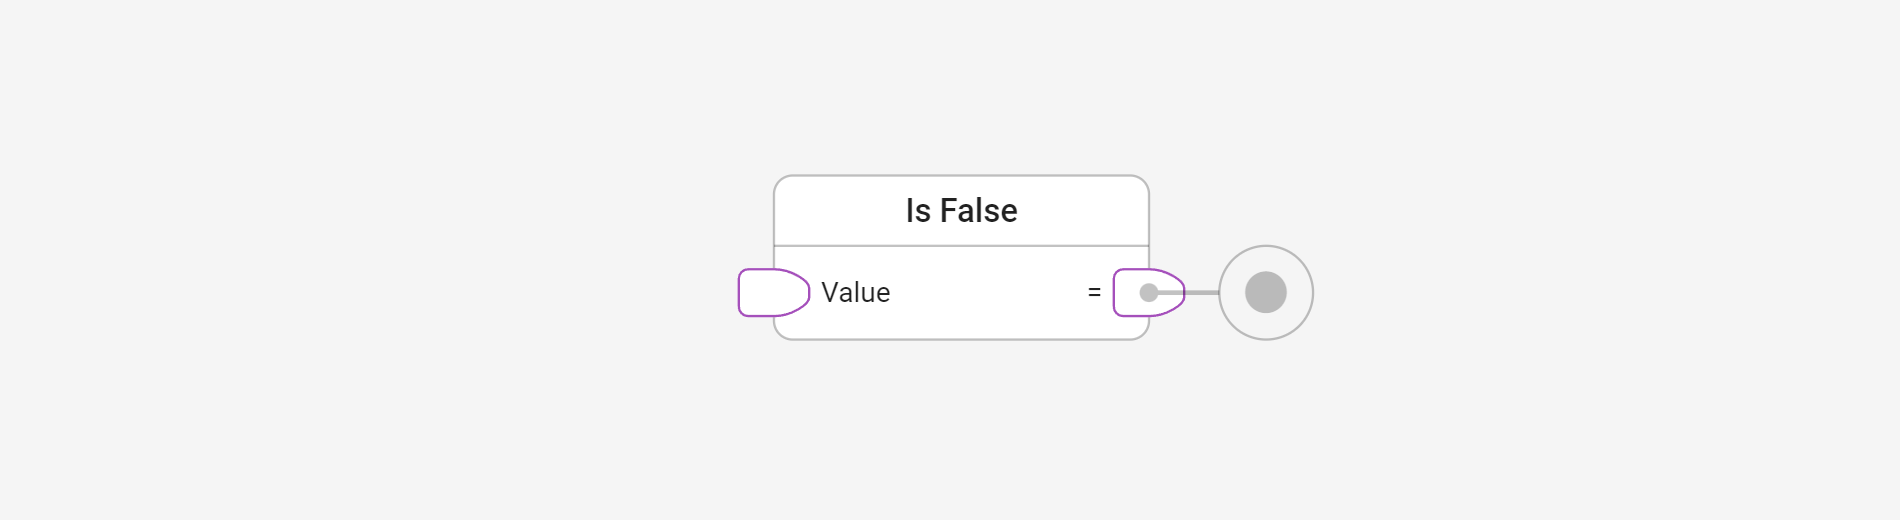 Check if a value is false